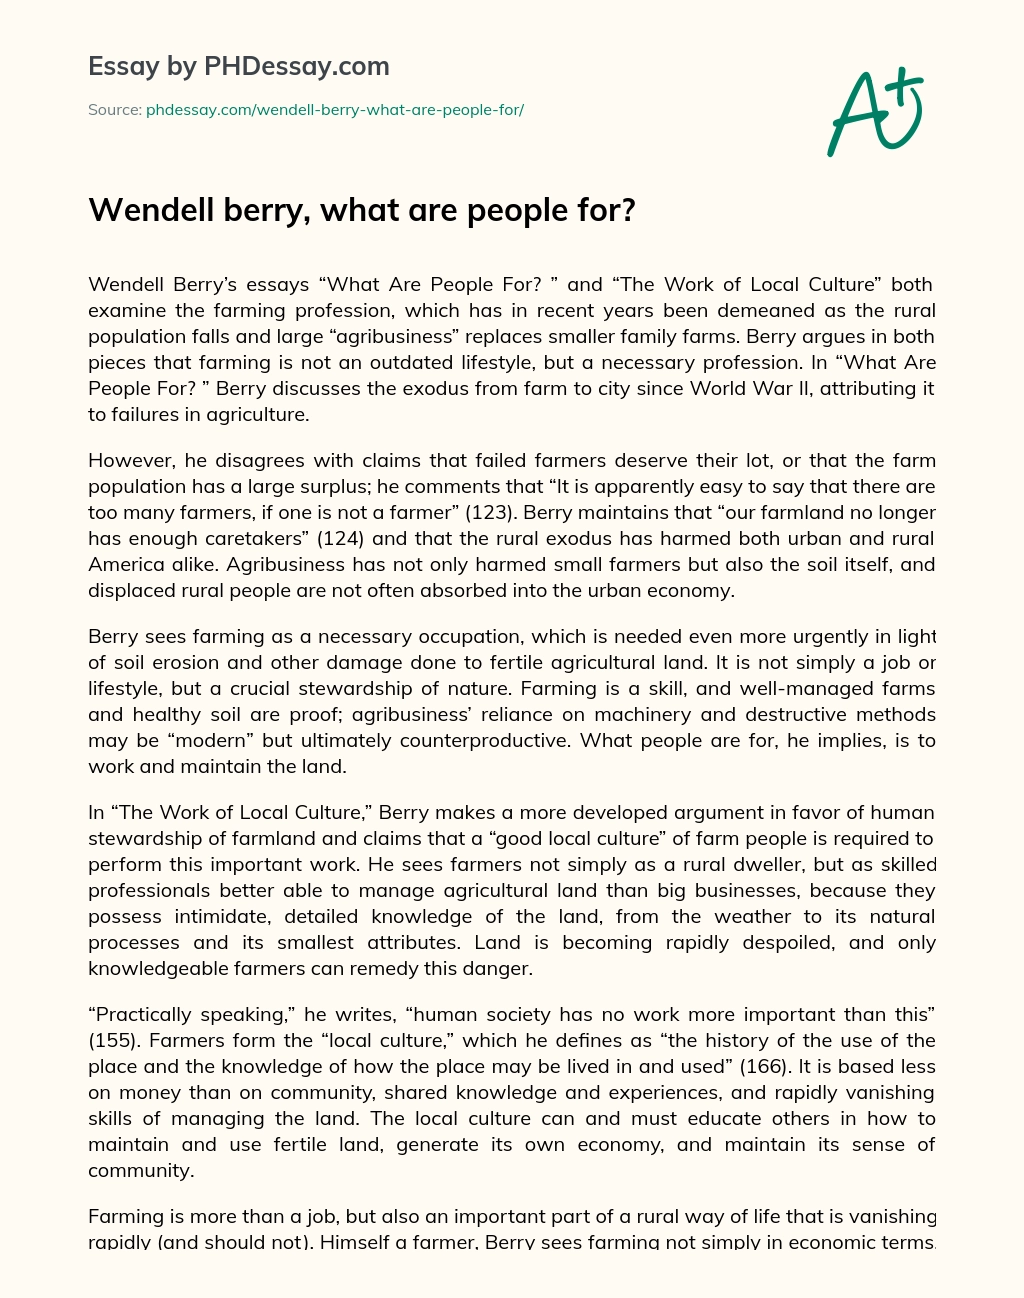 Wendell berry, what are people for? essay